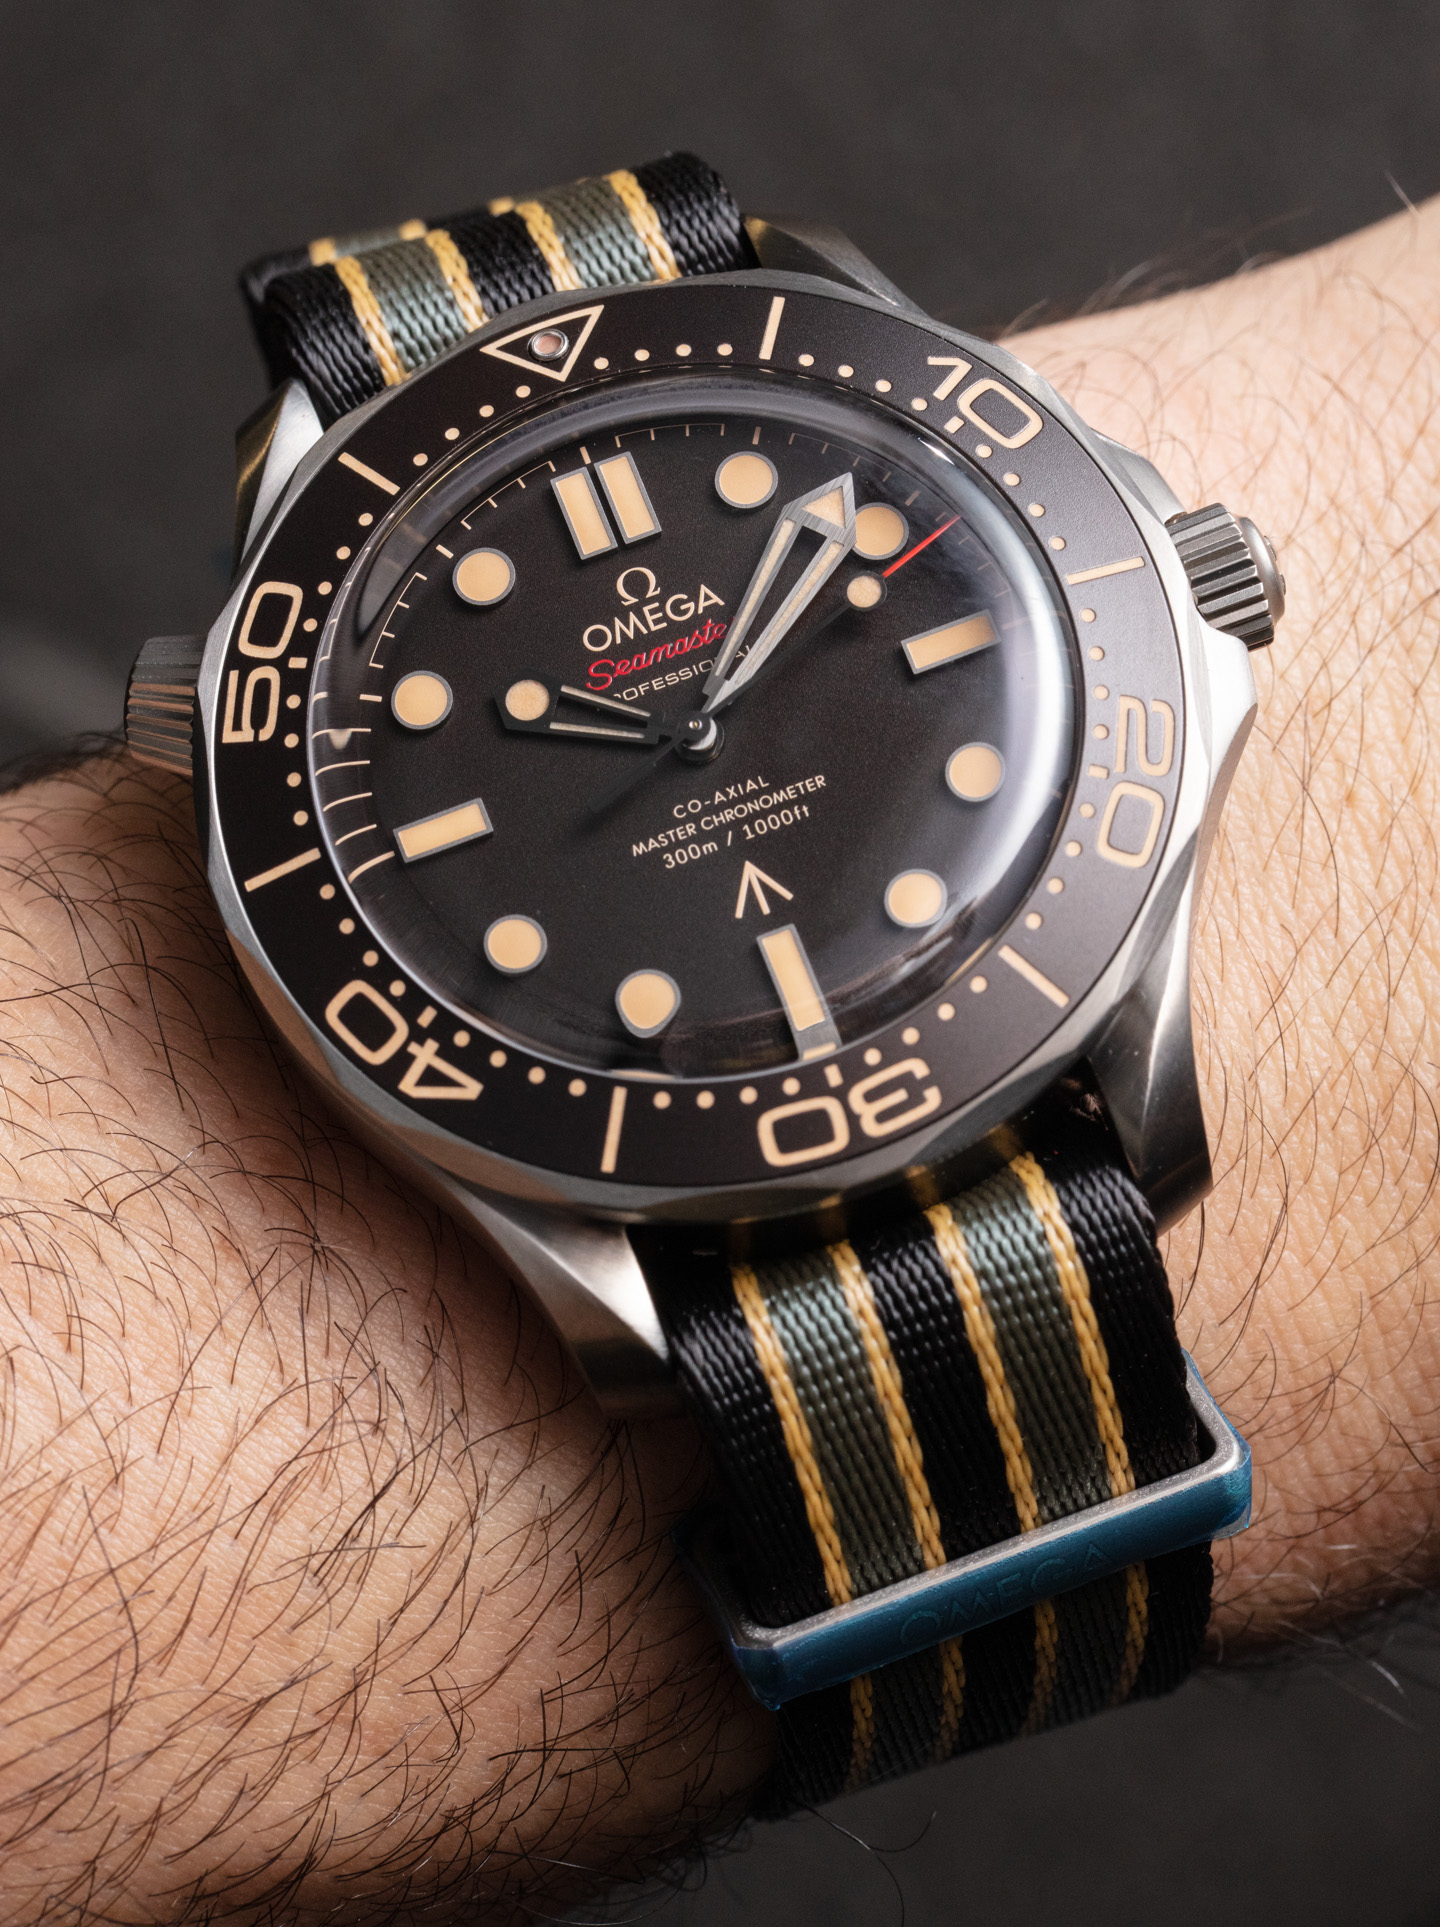 Hands-On: Omega Seamaster 300M 'No Time To Die' Watch Daniel Craig | aBlogtoWatch